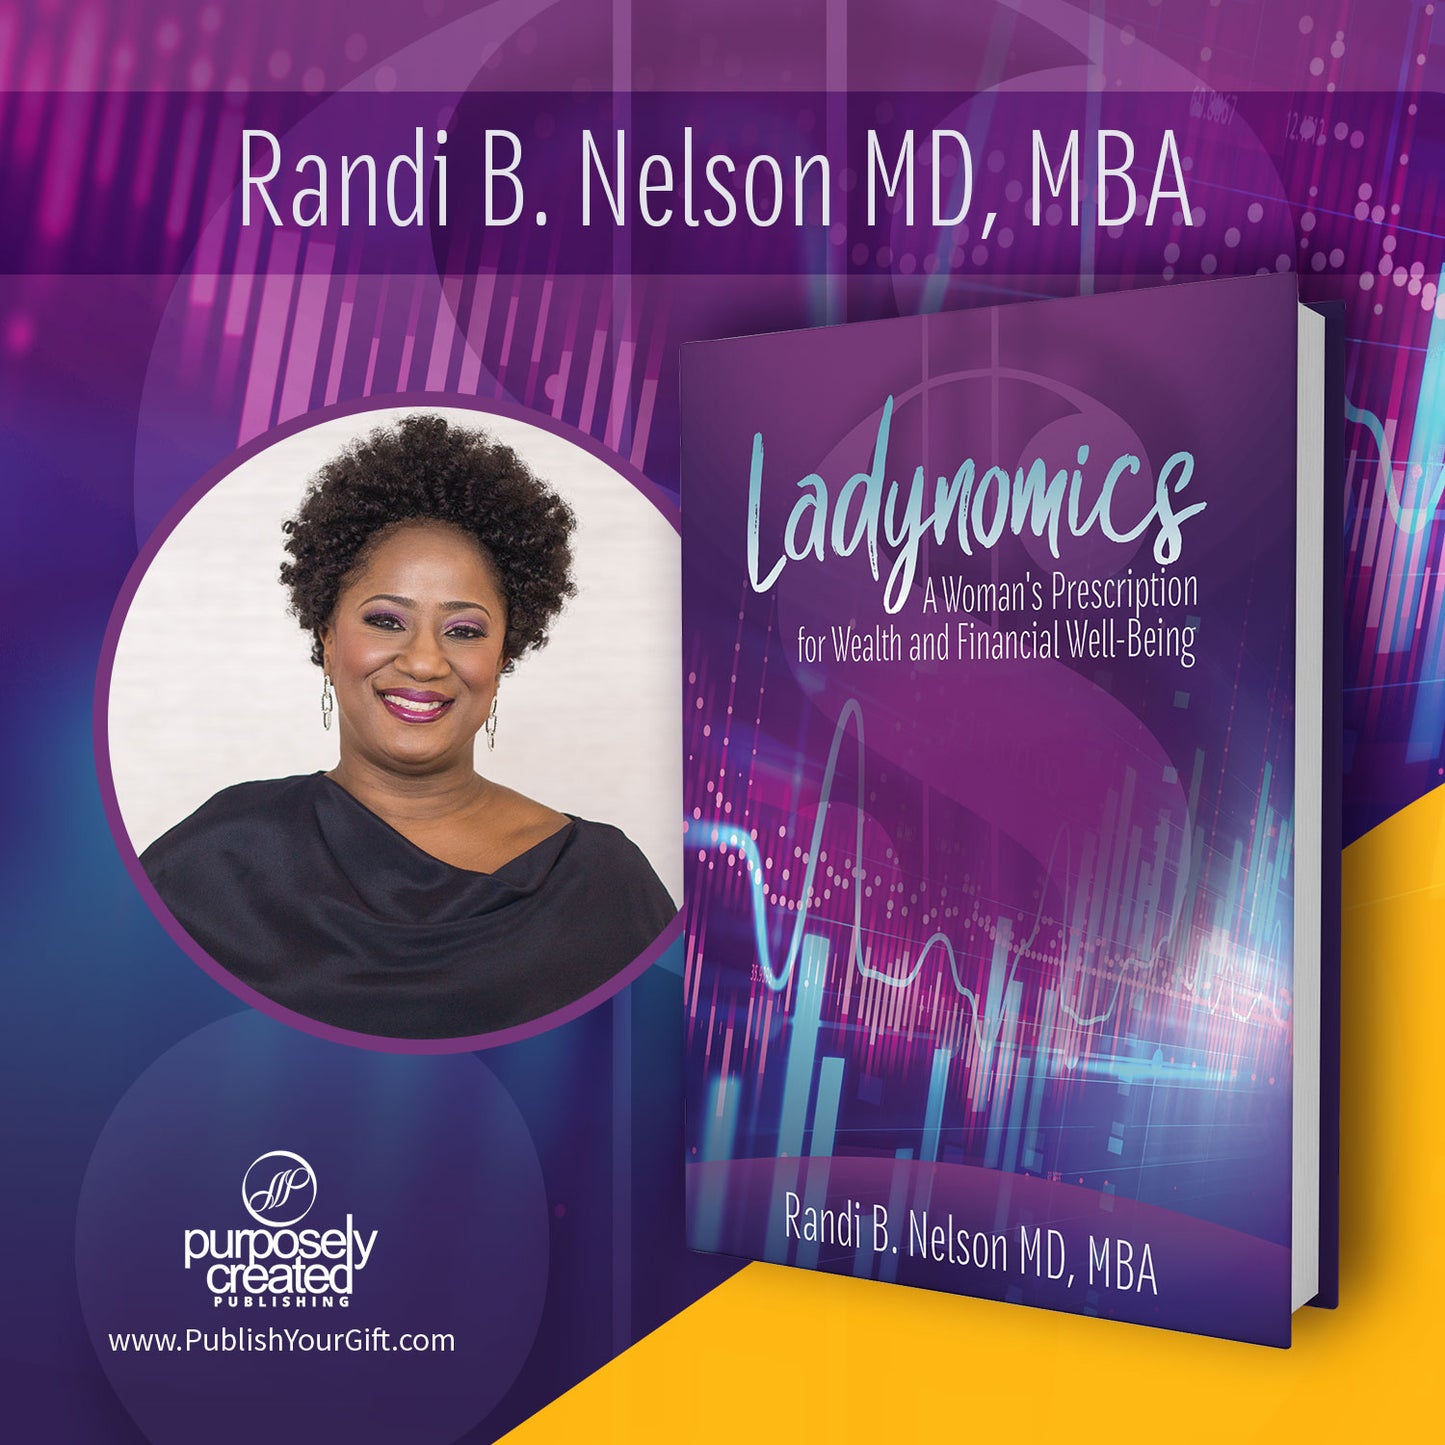 Ladynomics; The Women's Prescription to Wealth and Financial Well-Being